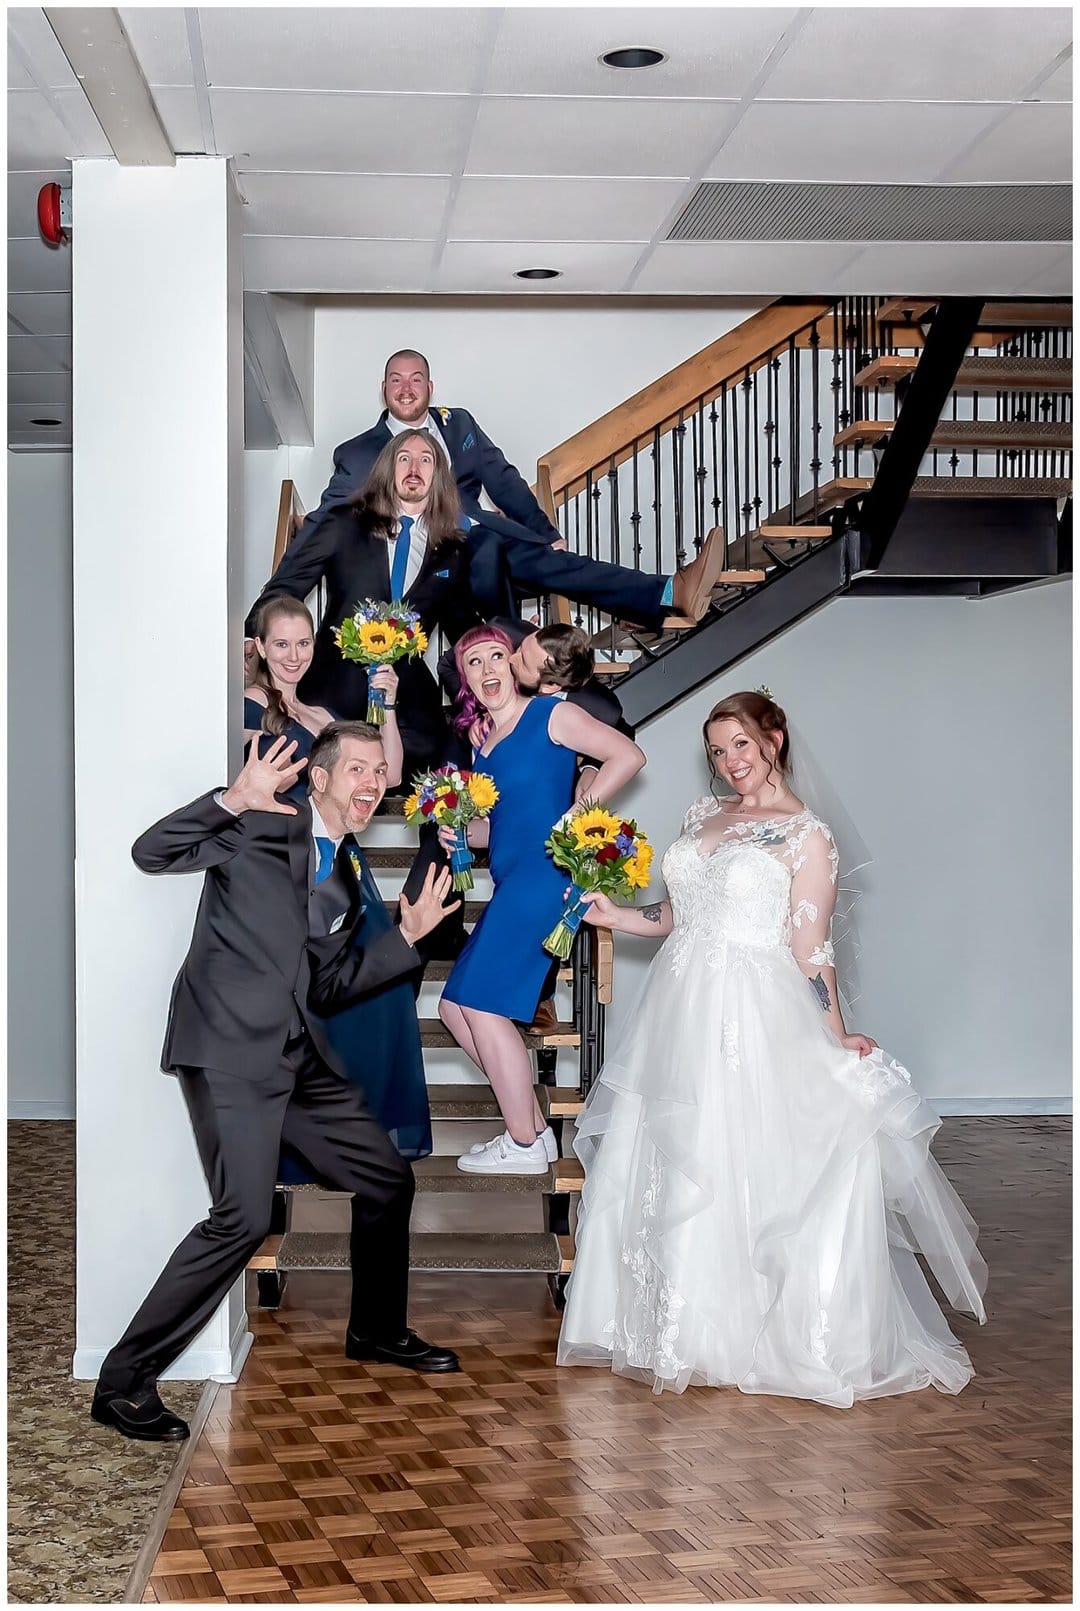 The wedding party, bride and groom do funny poses on stairs at Saraguay House for their wedding photos.